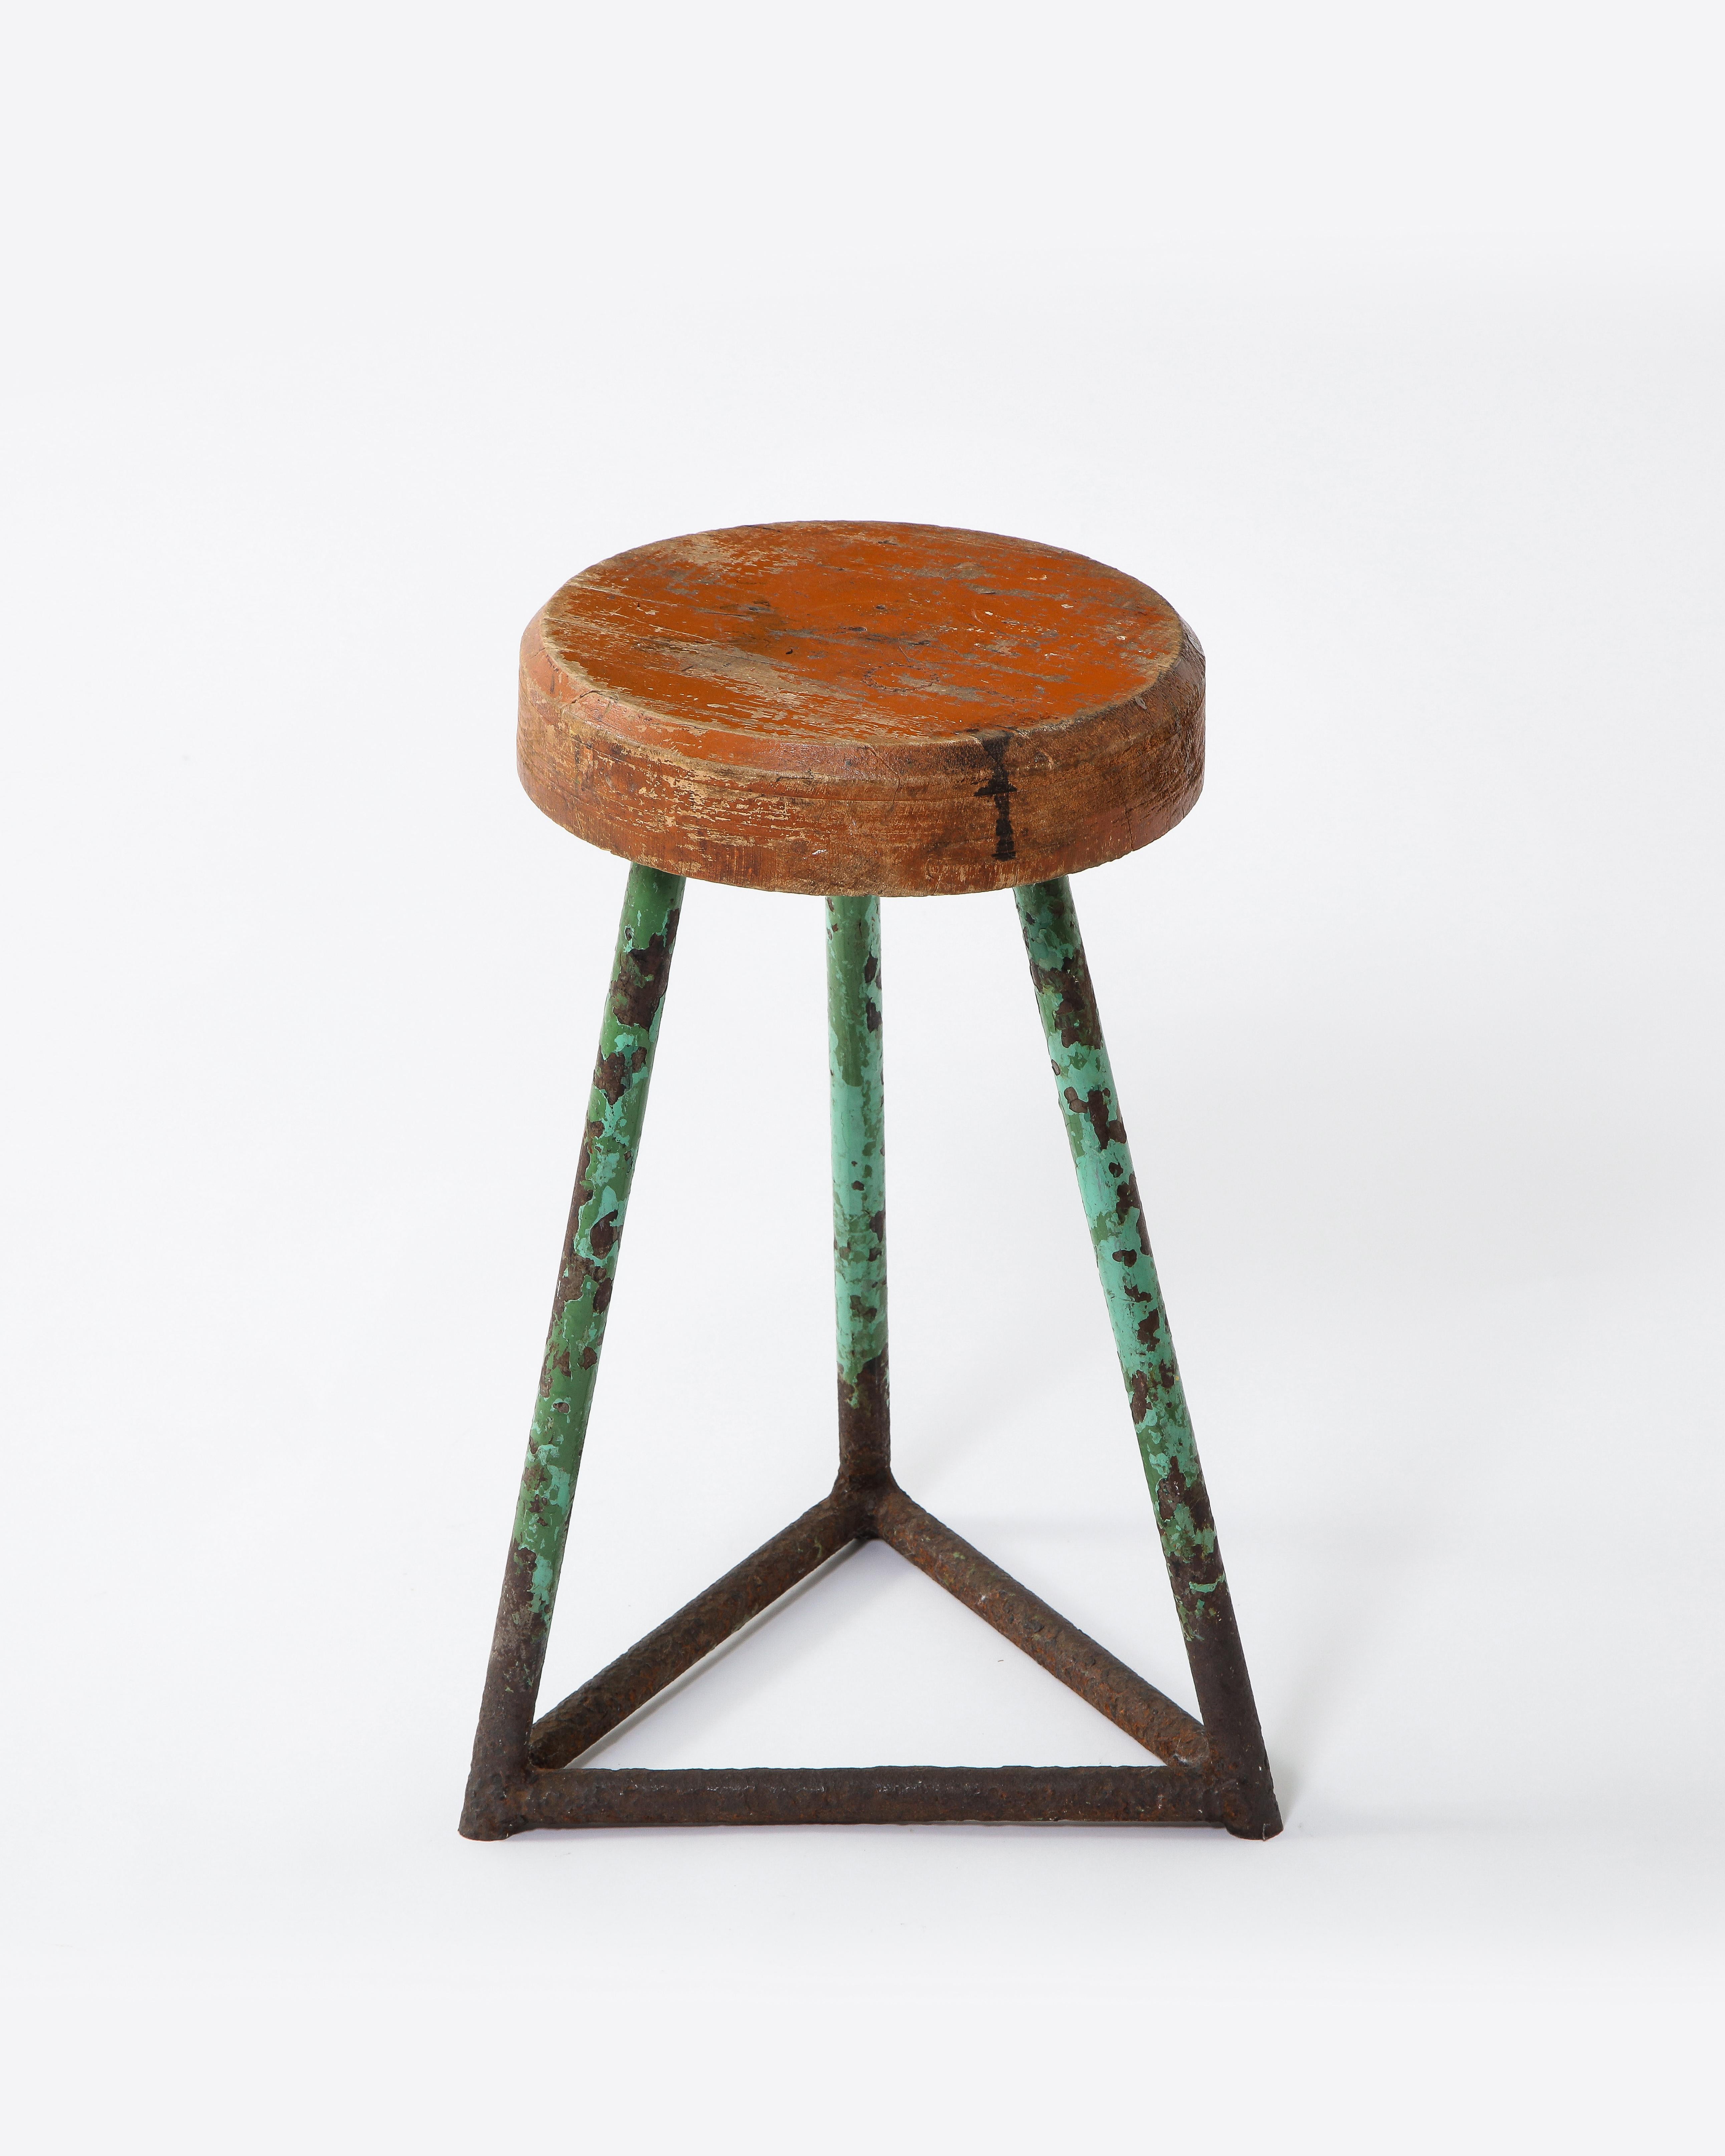 Vintage Industrial Wood and Metal Stool, Heavy Patina, Belgium 1960's For Sale 3